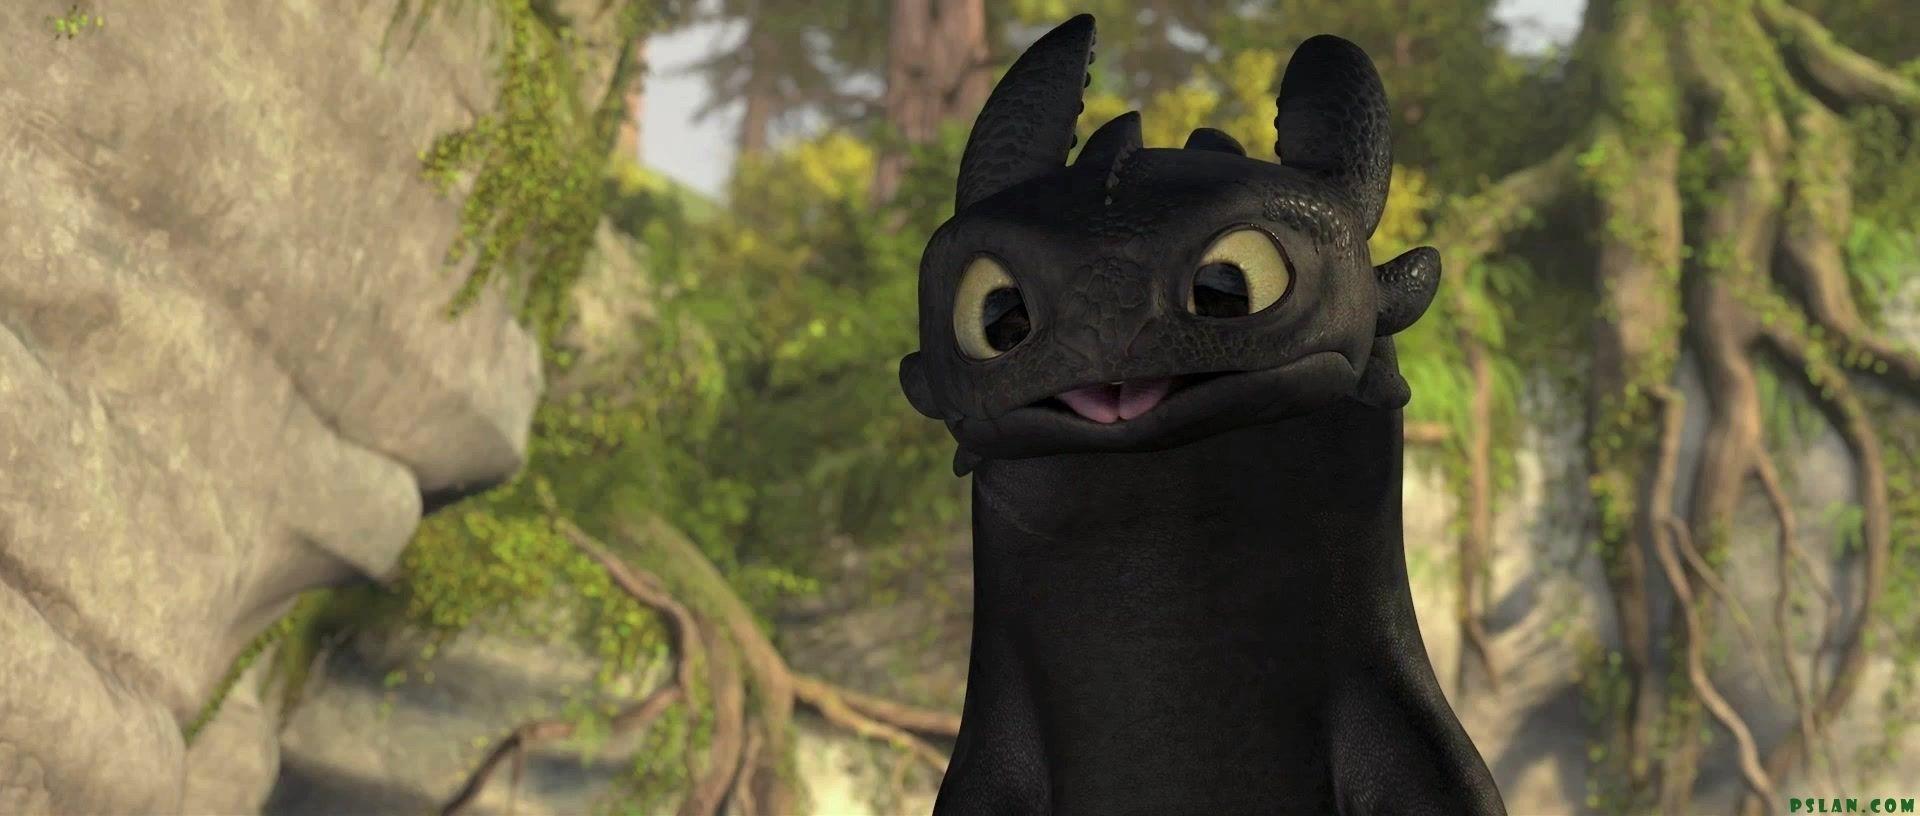 Download how to train your dragon wallpaper toothless 3 ? High